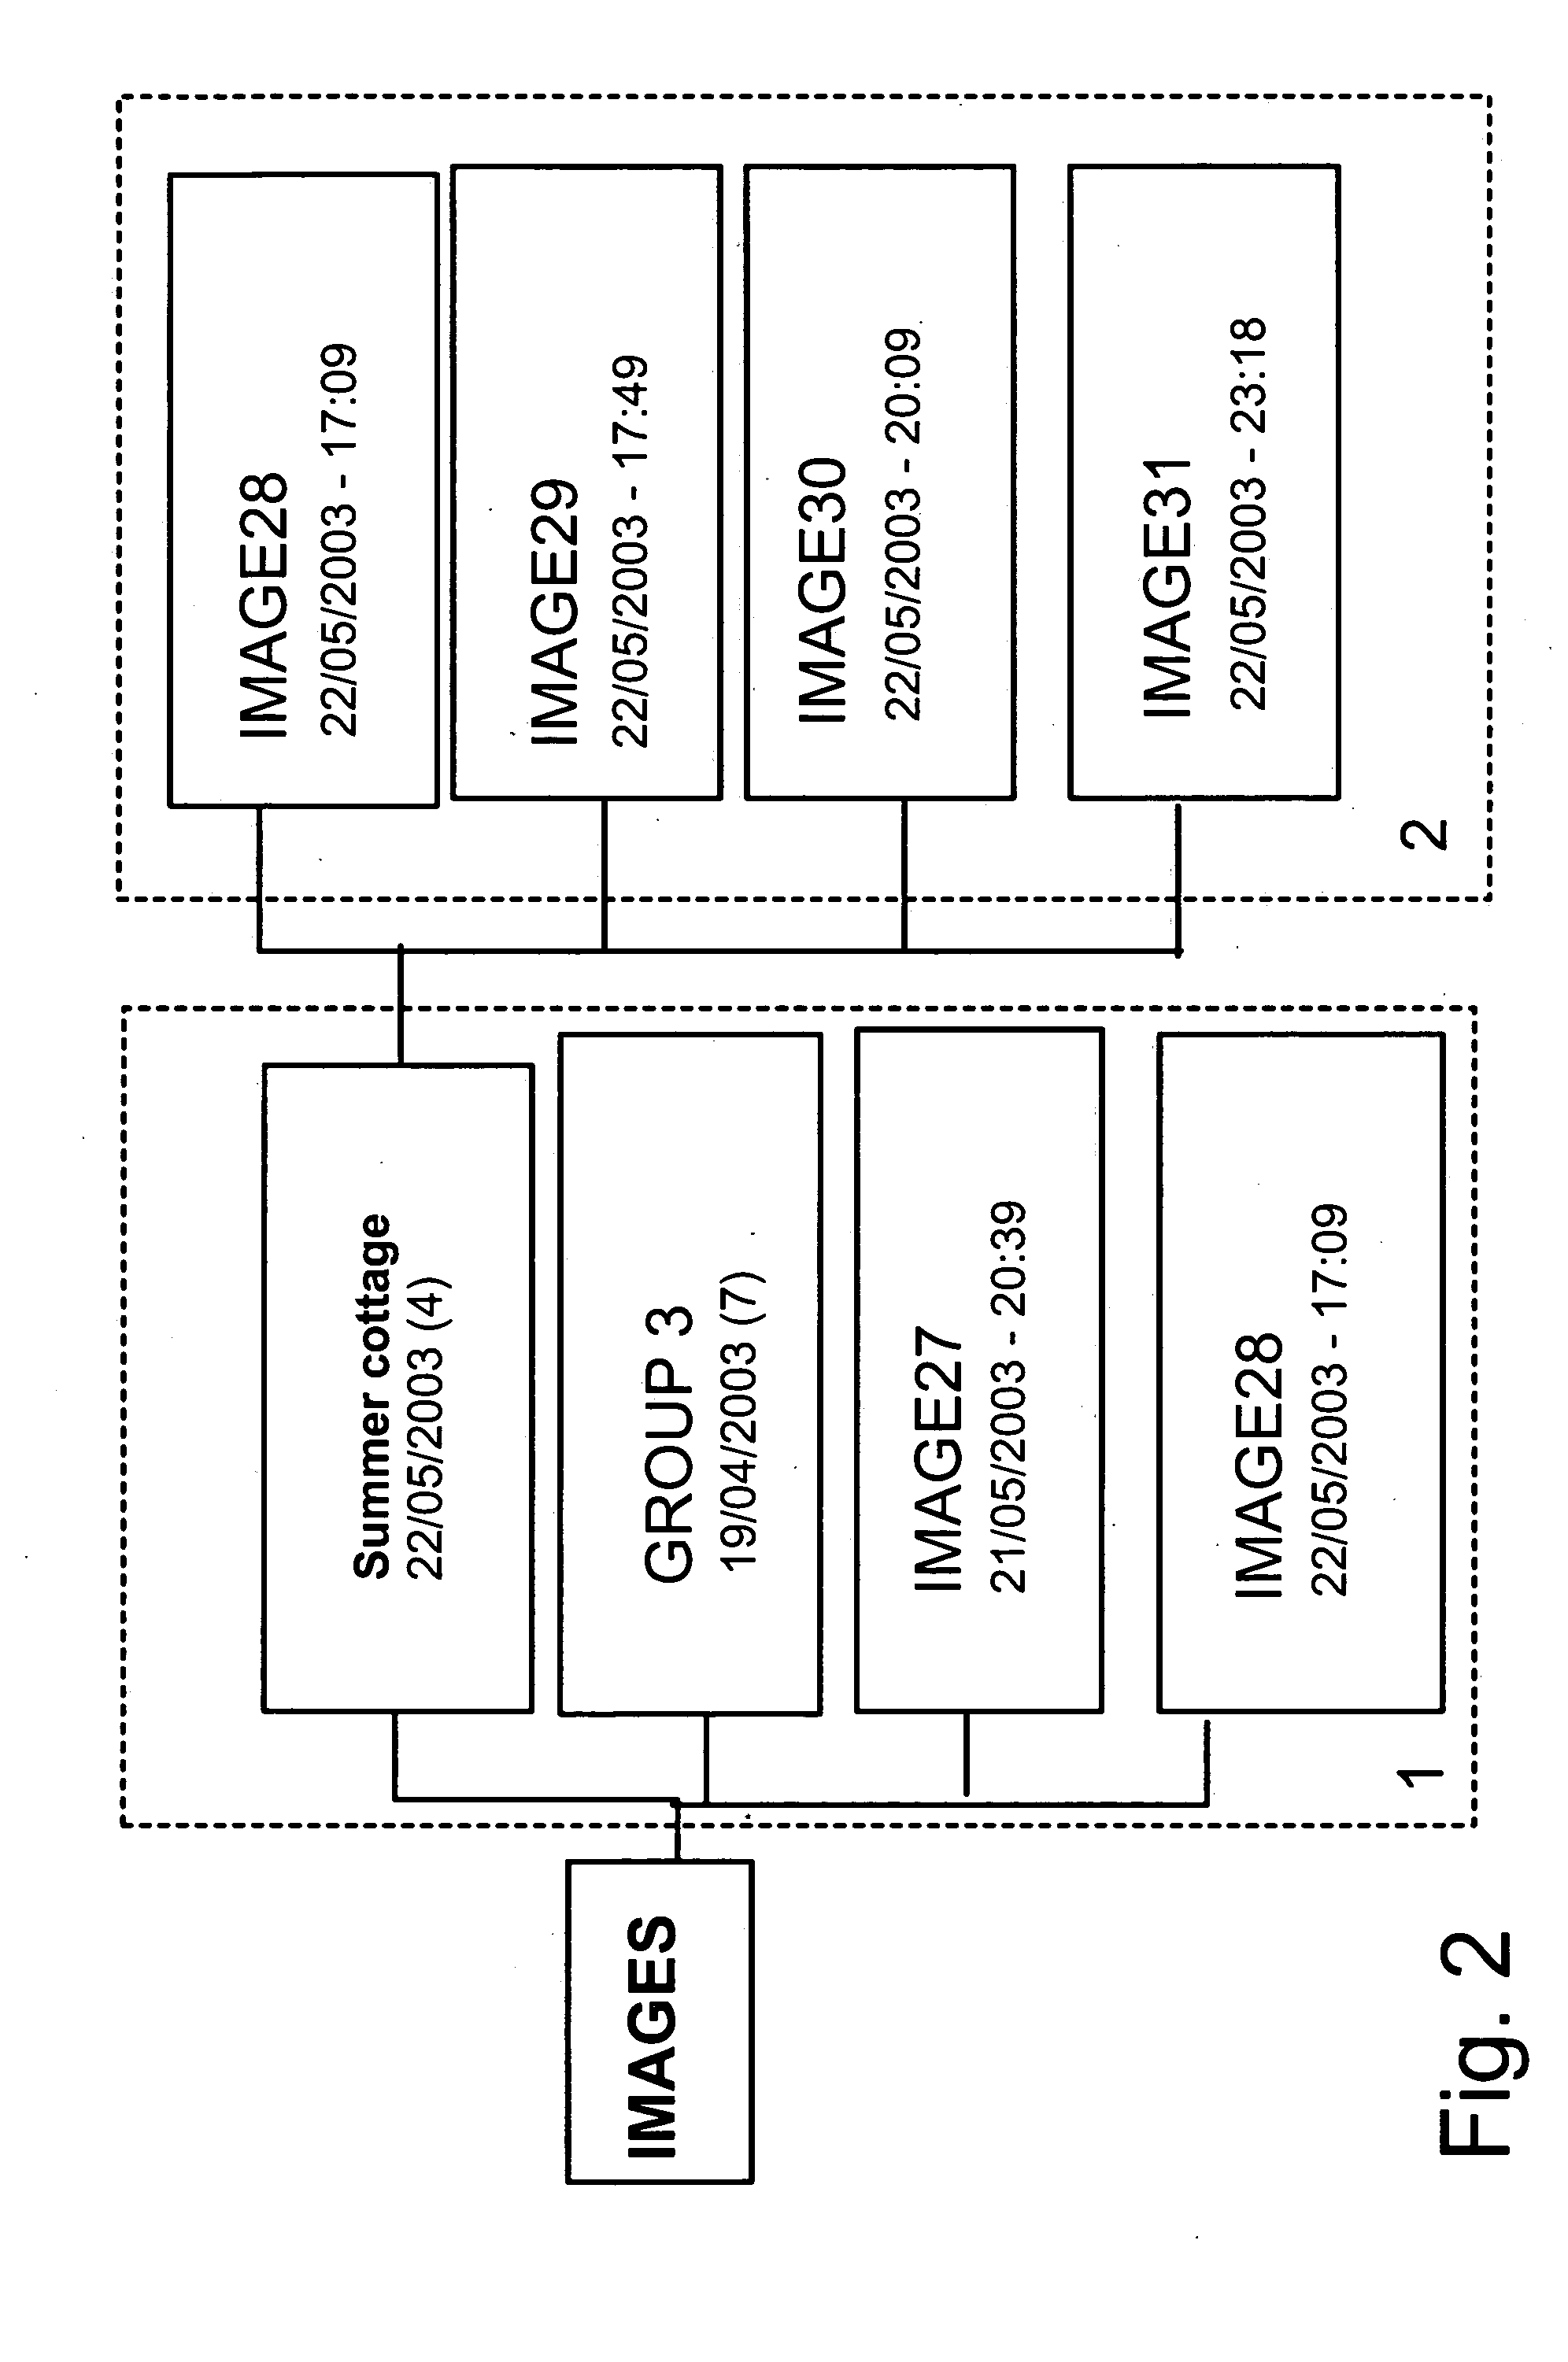 Method for clustering and querying media items